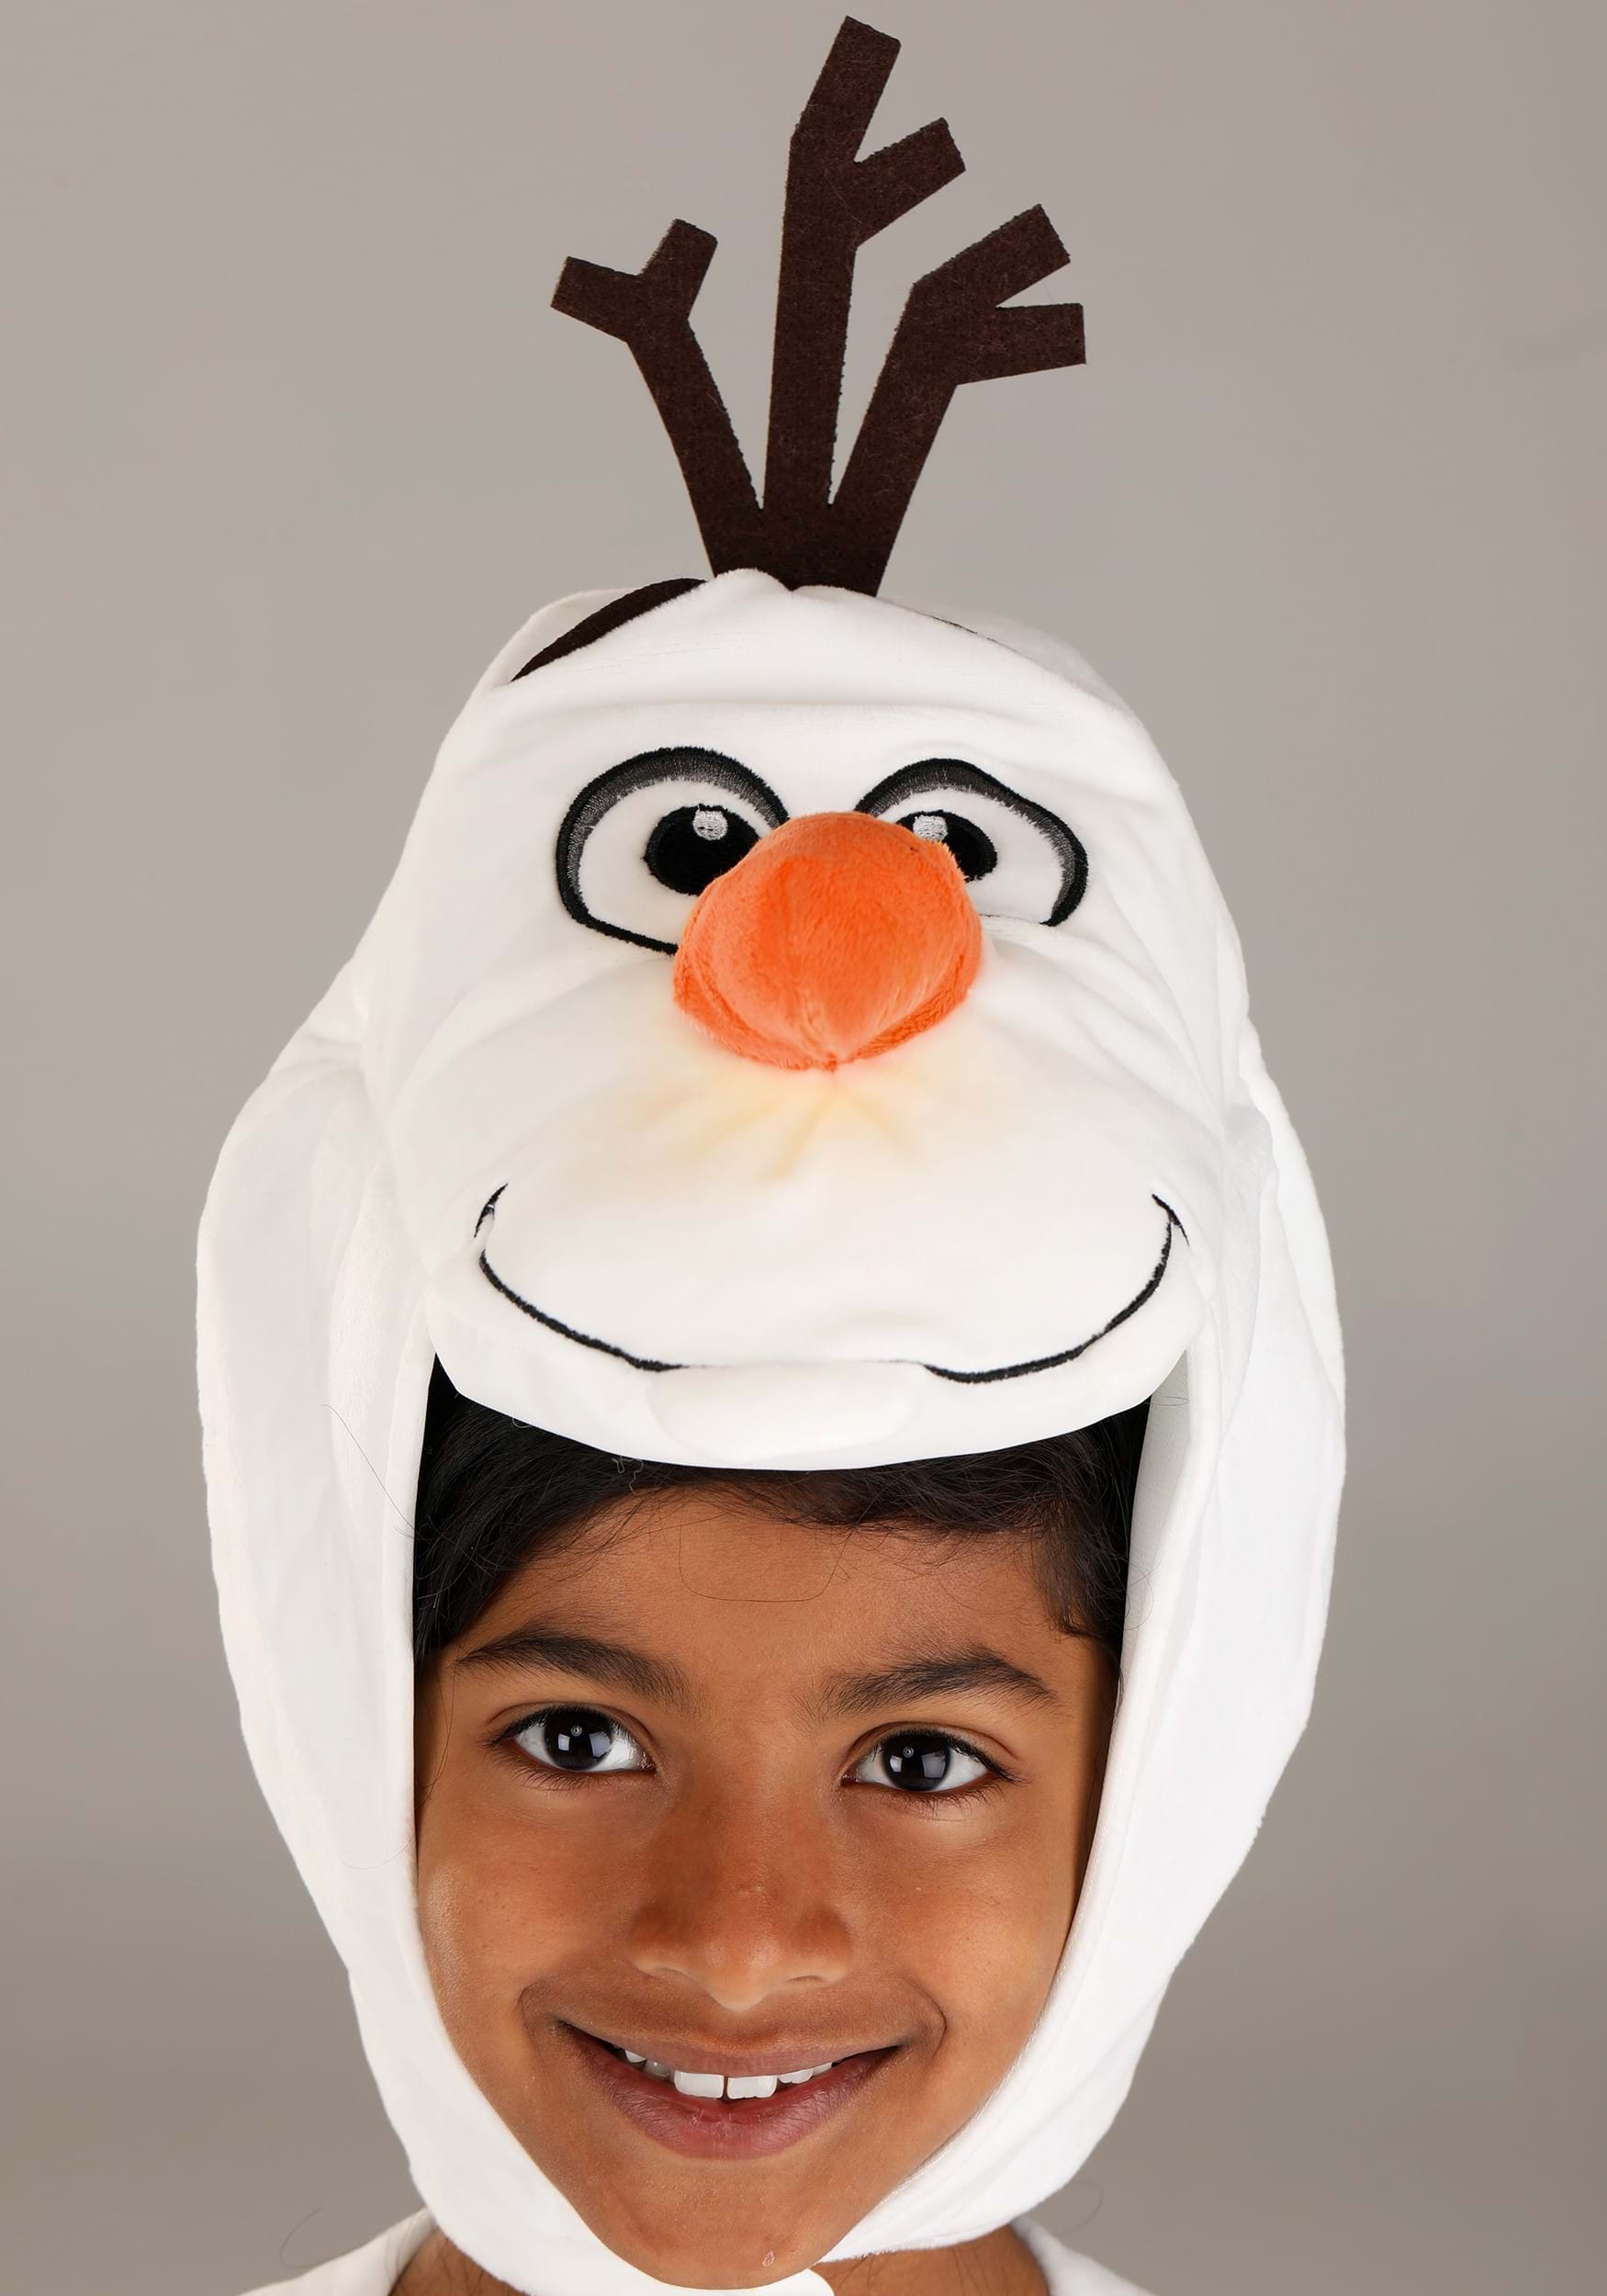 Frozen Olaf Costume for Kids